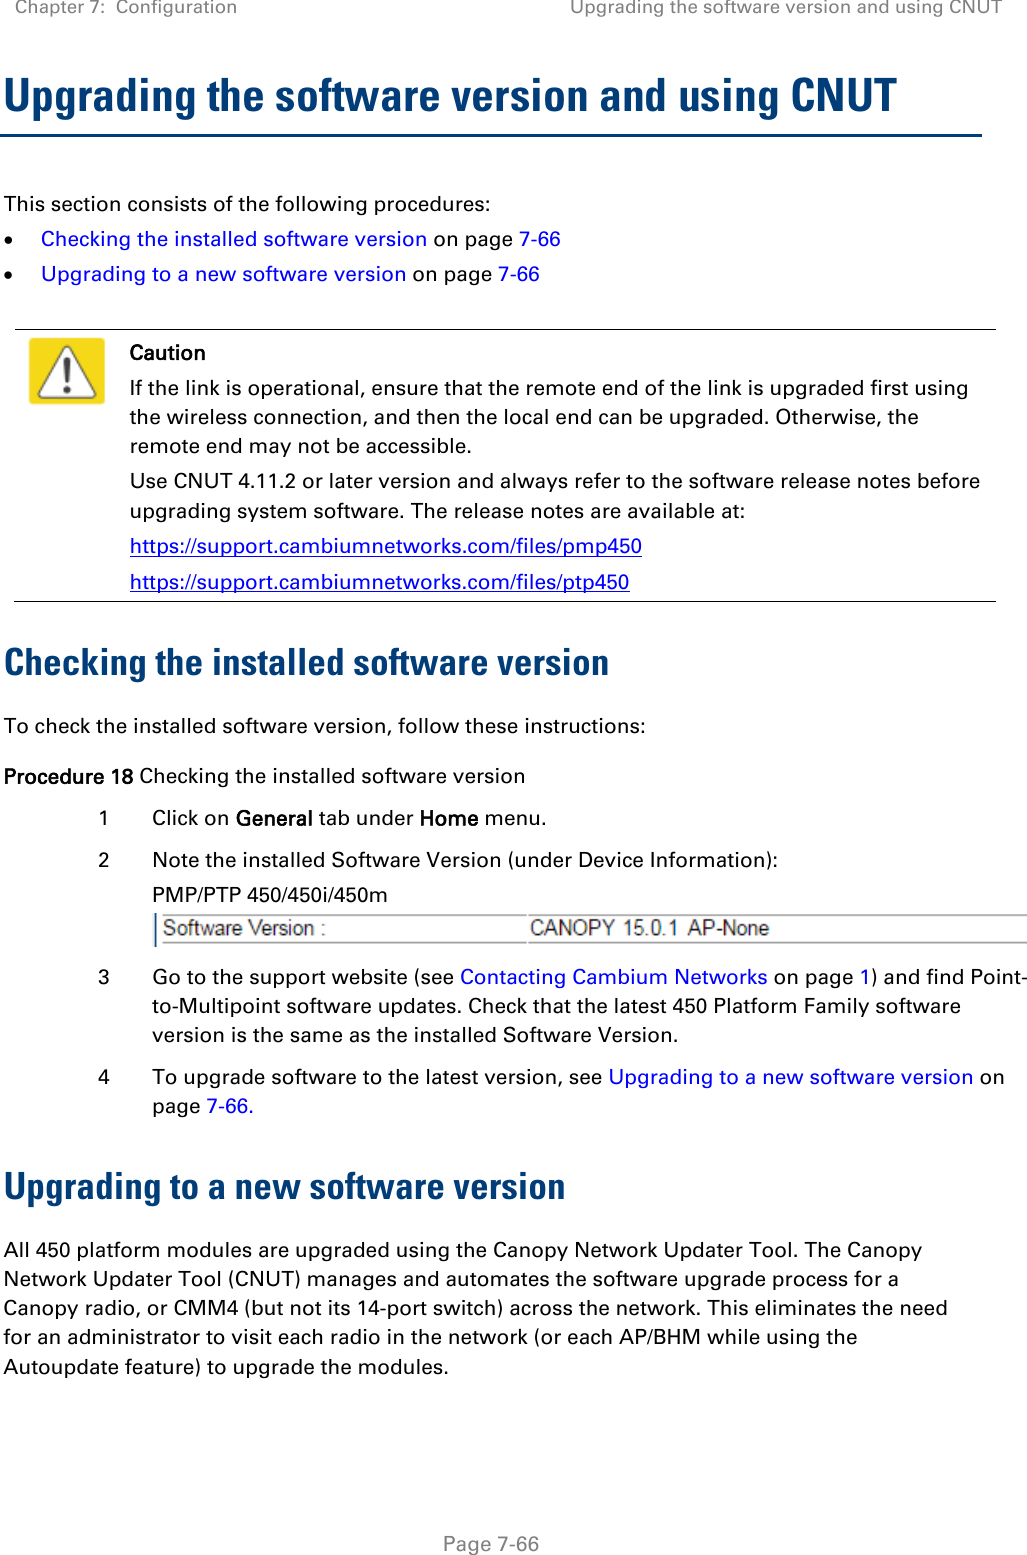 Chapter 7:  Configuration Upgrading the software version and using CNUT   Page 7-66 Upgrading the software version and using CNUT This section consists of the following procedures: • Checking the installed software version on page 7-66 • Upgrading to a new software version on page 7-66   Caution If the link is operational, ensure that the remote end of the link is upgraded first using the wireless connection, and then the local end can be upgraded. Otherwise, the remote end may not be accessible. Use CNUT 4.11.2 or later version and always refer to the software release notes before upgrading system software. The release notes are available at: https://support.cambiumnetworks.com/files/pmp450 https://support.cambiumnetworks.com/files/ptp450 Checking the installed software version To check the installed software version, follow these instructions: Procedure 18 Checking the installed software version 1  Click on General tab under Home menu. 2  Note the installed Software Version (under Device Information): PMP/PTP 450/450i/450m   3  Go to the support website (see Contacting Cambium Networks on page 1) and find Point-to-Multipoint software updates. Check that the latest 450 Platform Family software version is the same as the installed Software Version. 4  To upgrade software to the latest version, see Upgrading to a new software version on page 7-66. Upgrading to a new software version All 450 platform modules are upgraded using the Canopy Network Updater Tool. The Canopy Network Updater Tool (CNUT) manages and automates the software upgrade process for a Canopy radio, or CMM4 (but not its 14-port switch) across the network. This eliminates the need for an administrator to visit each radio in the network (or each AP/BHM while using the Autoupdate feature) to upgrade the modules.  